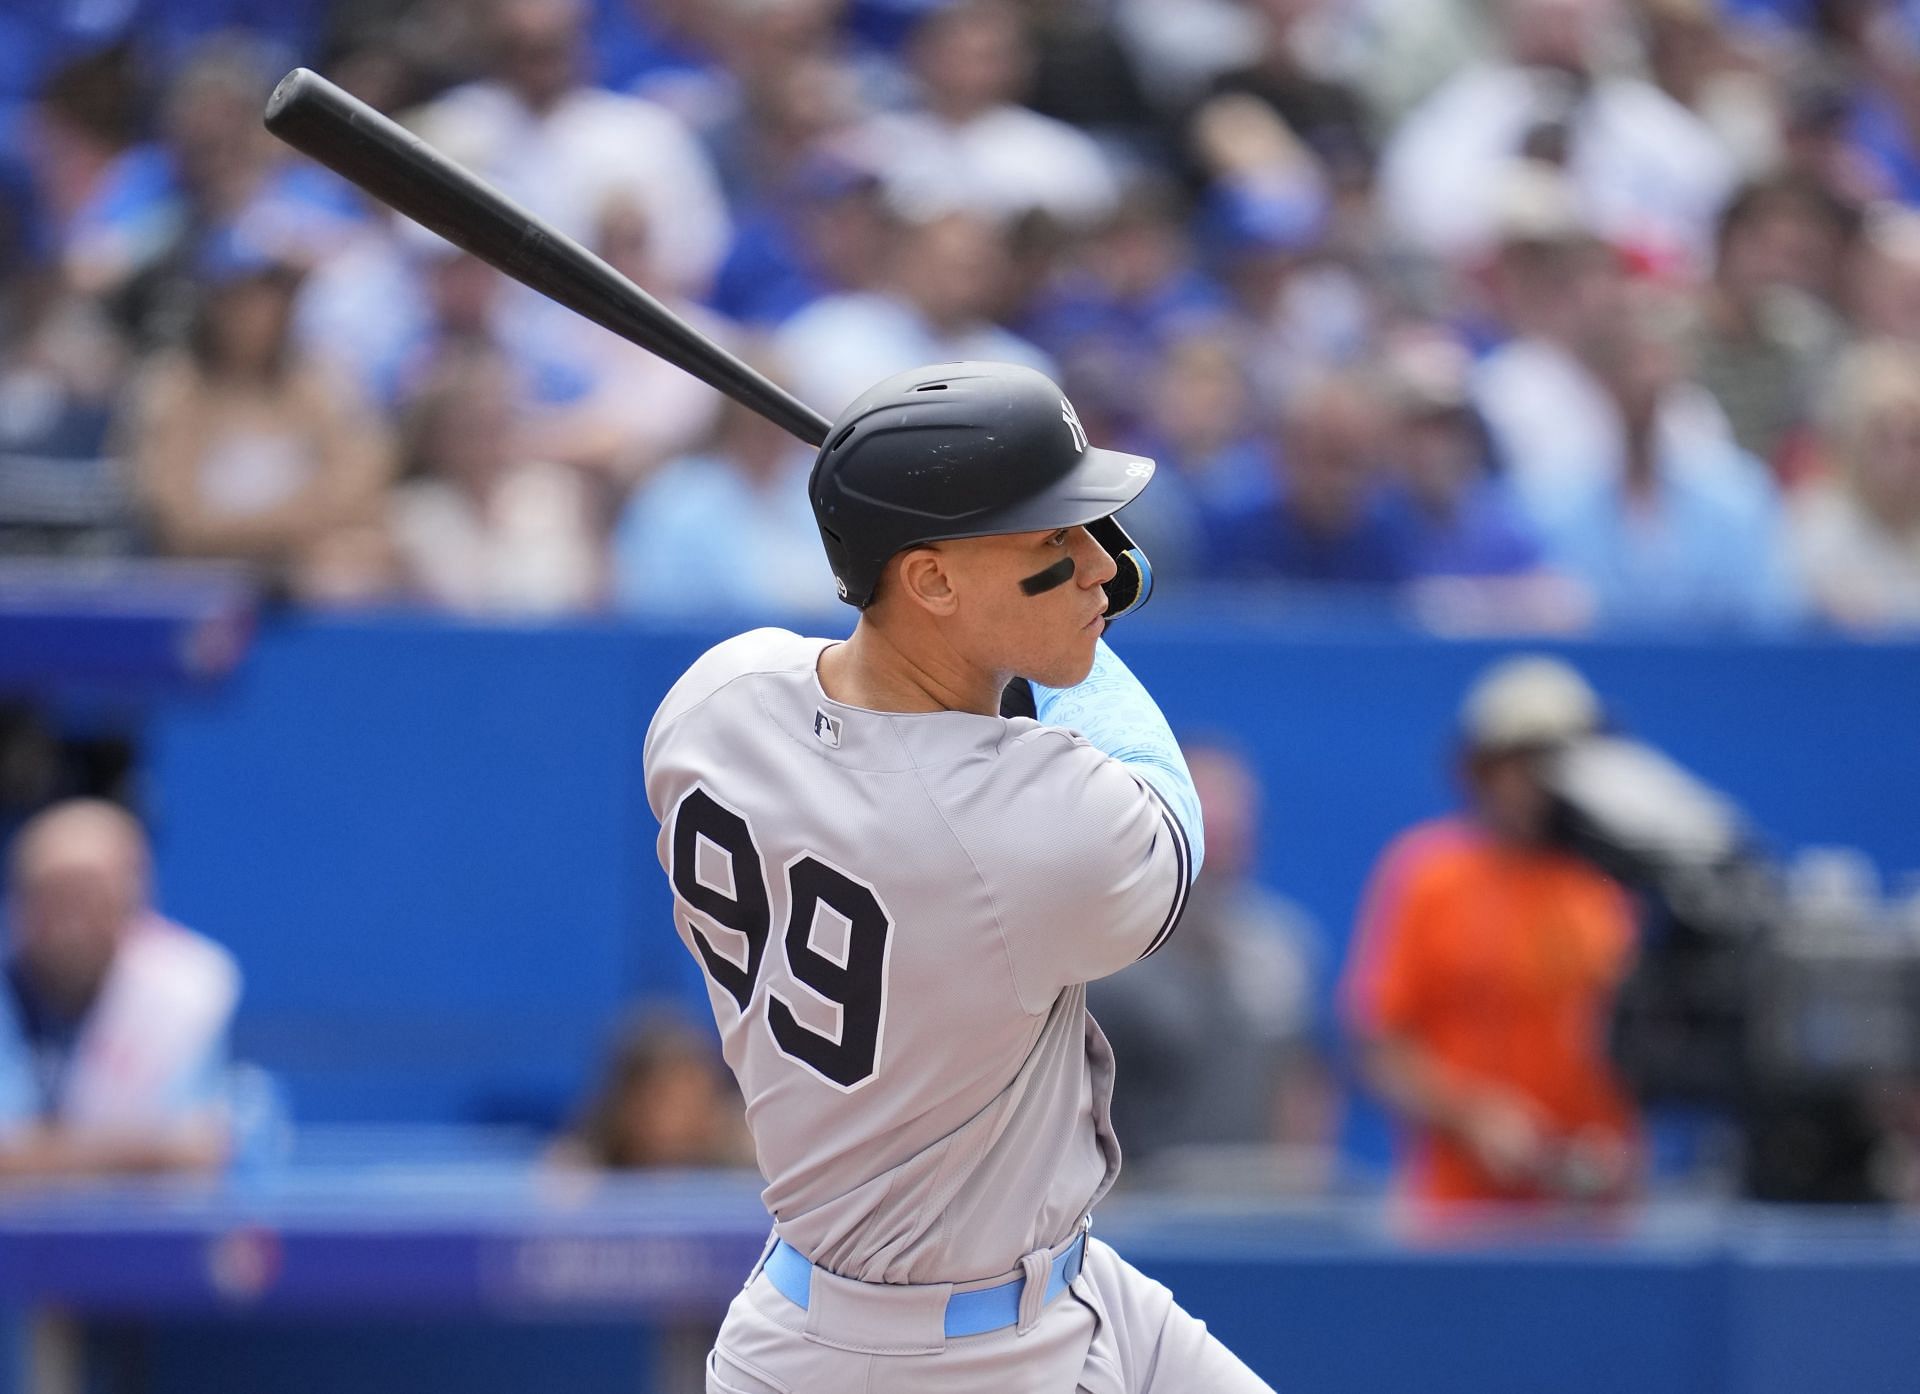 Aaron Judge hits an RBI double during New York Yankees v Toronto Blue Jays game.